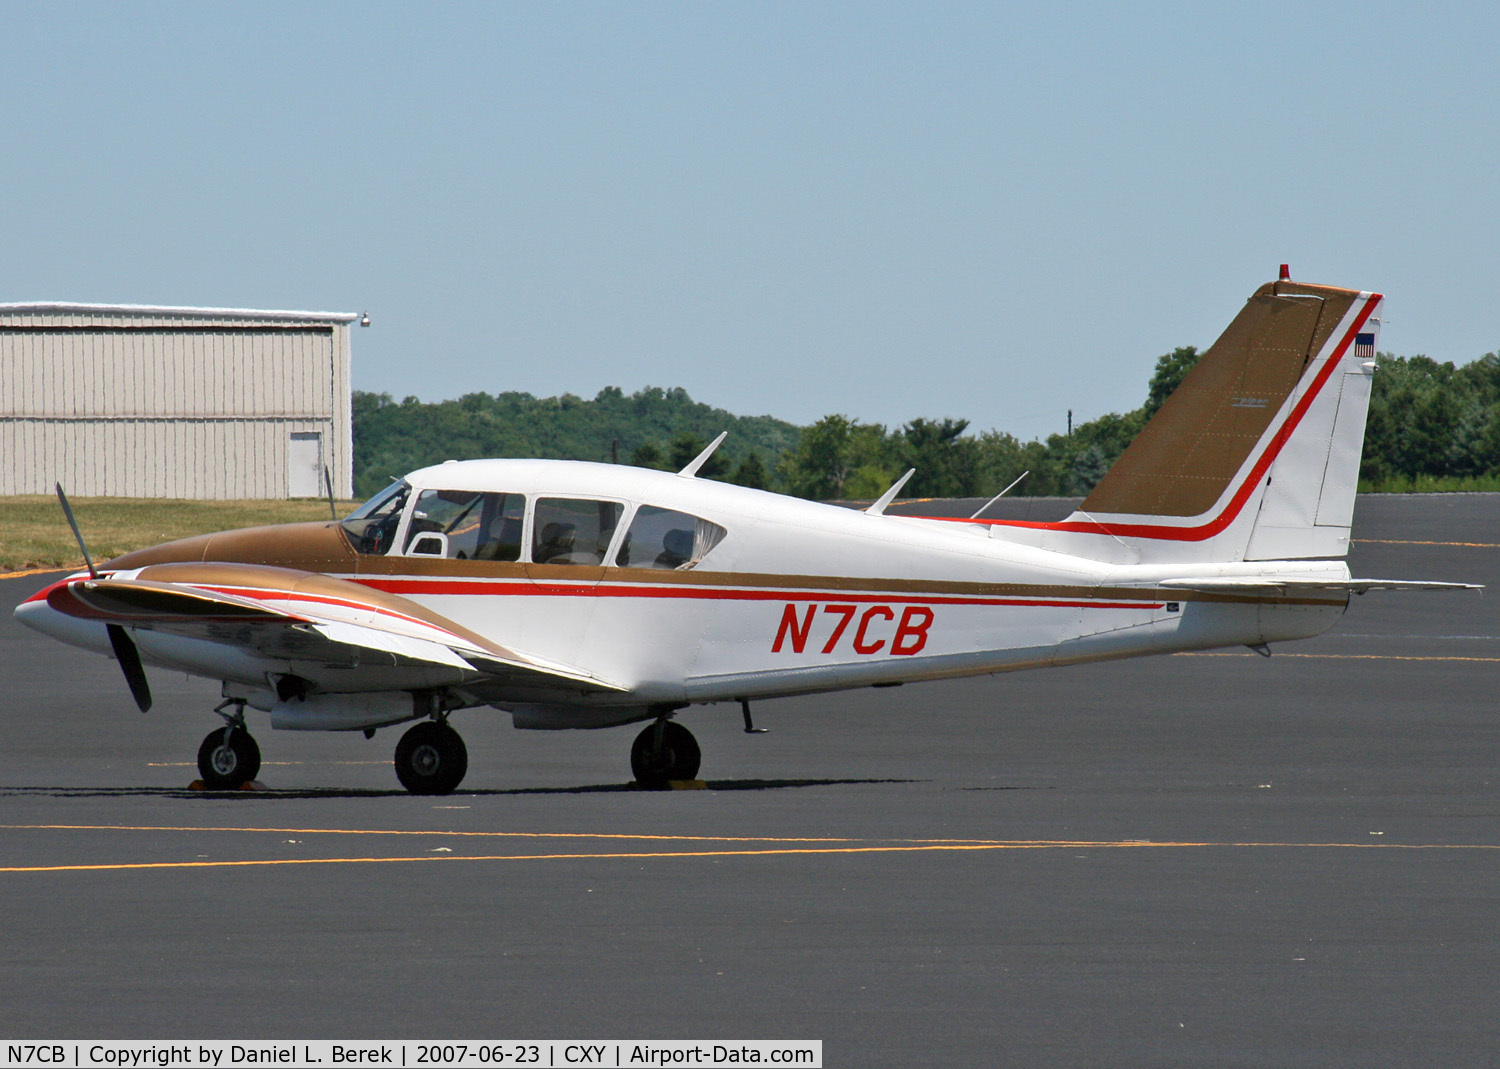 N7CB, 1972 Piper PA-23-250 Apache C/N 27-4802, This nice 1972 Aztec is an EAA support aircraft.